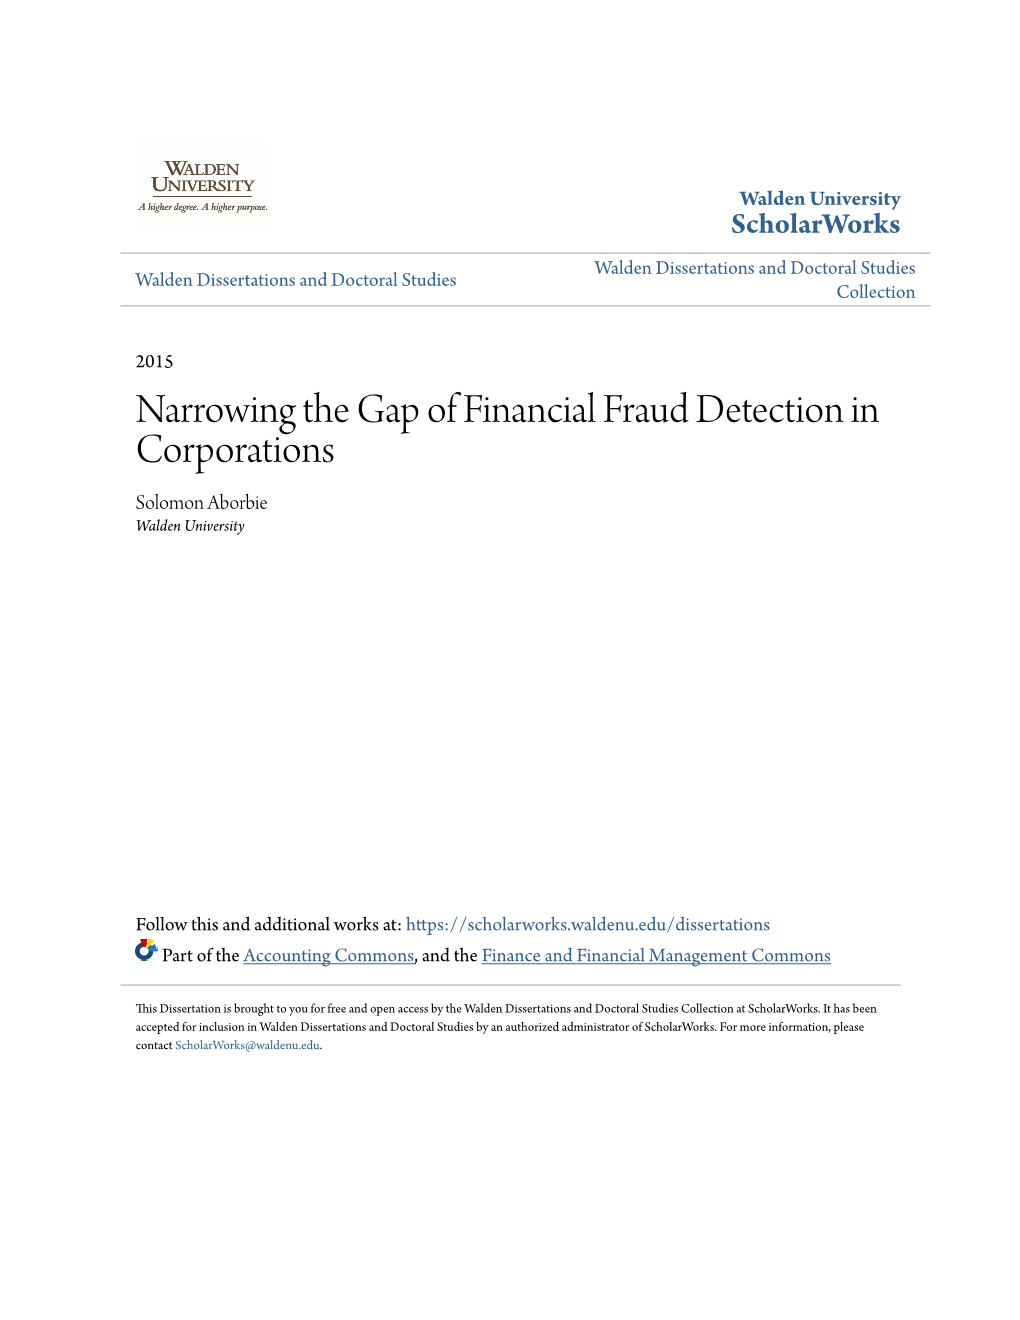 Narrowing the Gap of Financial Fraud Detection in Corporations Solomon Aborbie Walden University